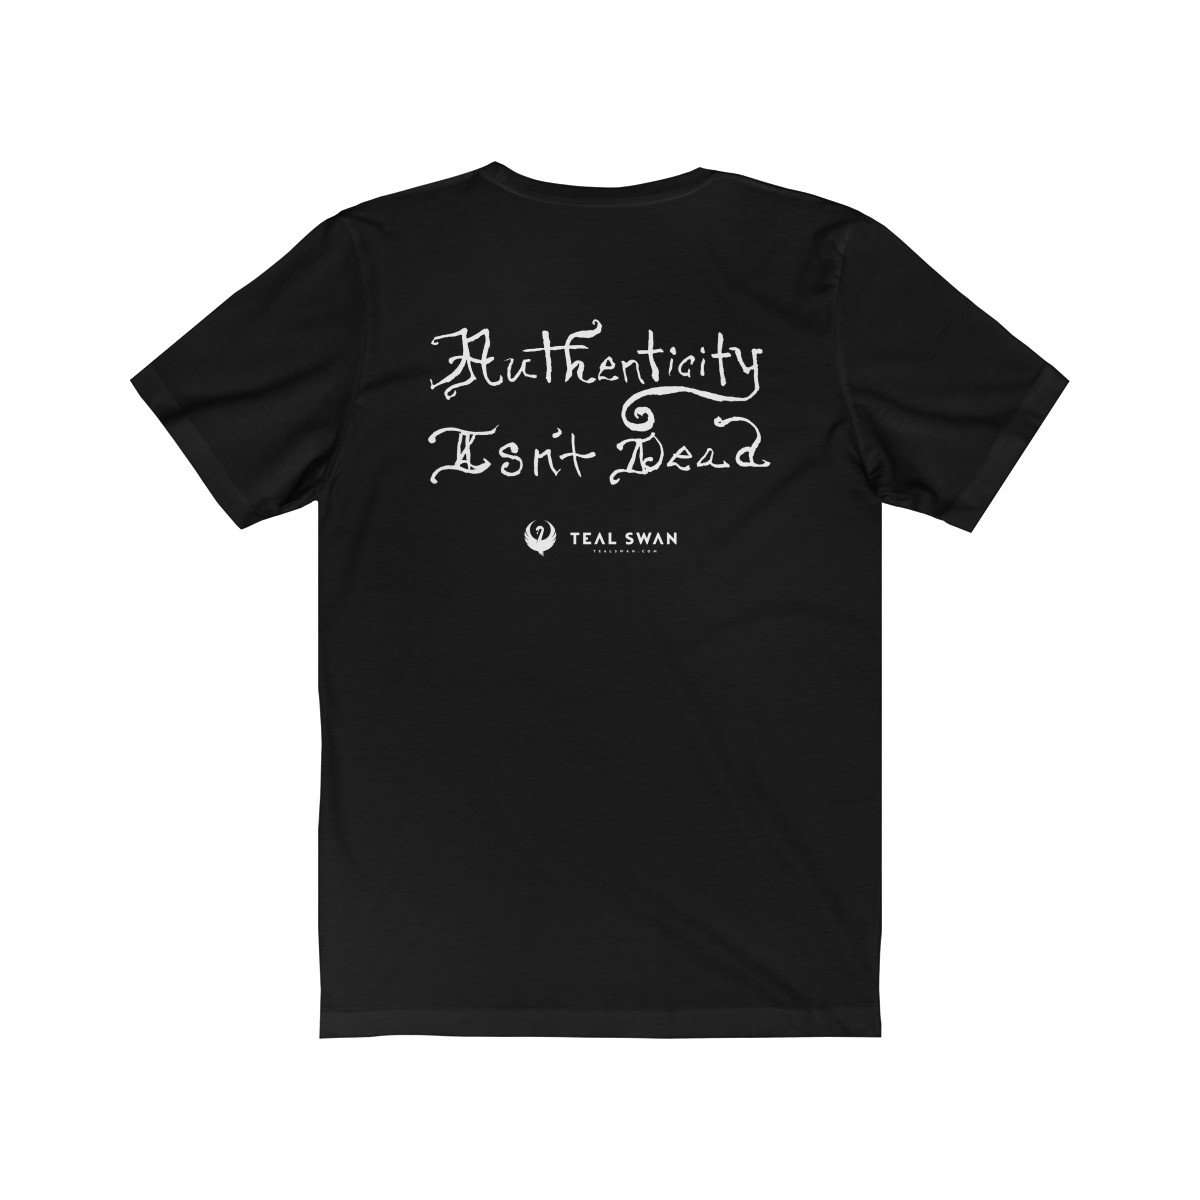 Authenticity Isn't Dead Quote - Large Swan in The Cure - Unisex T-Shirt